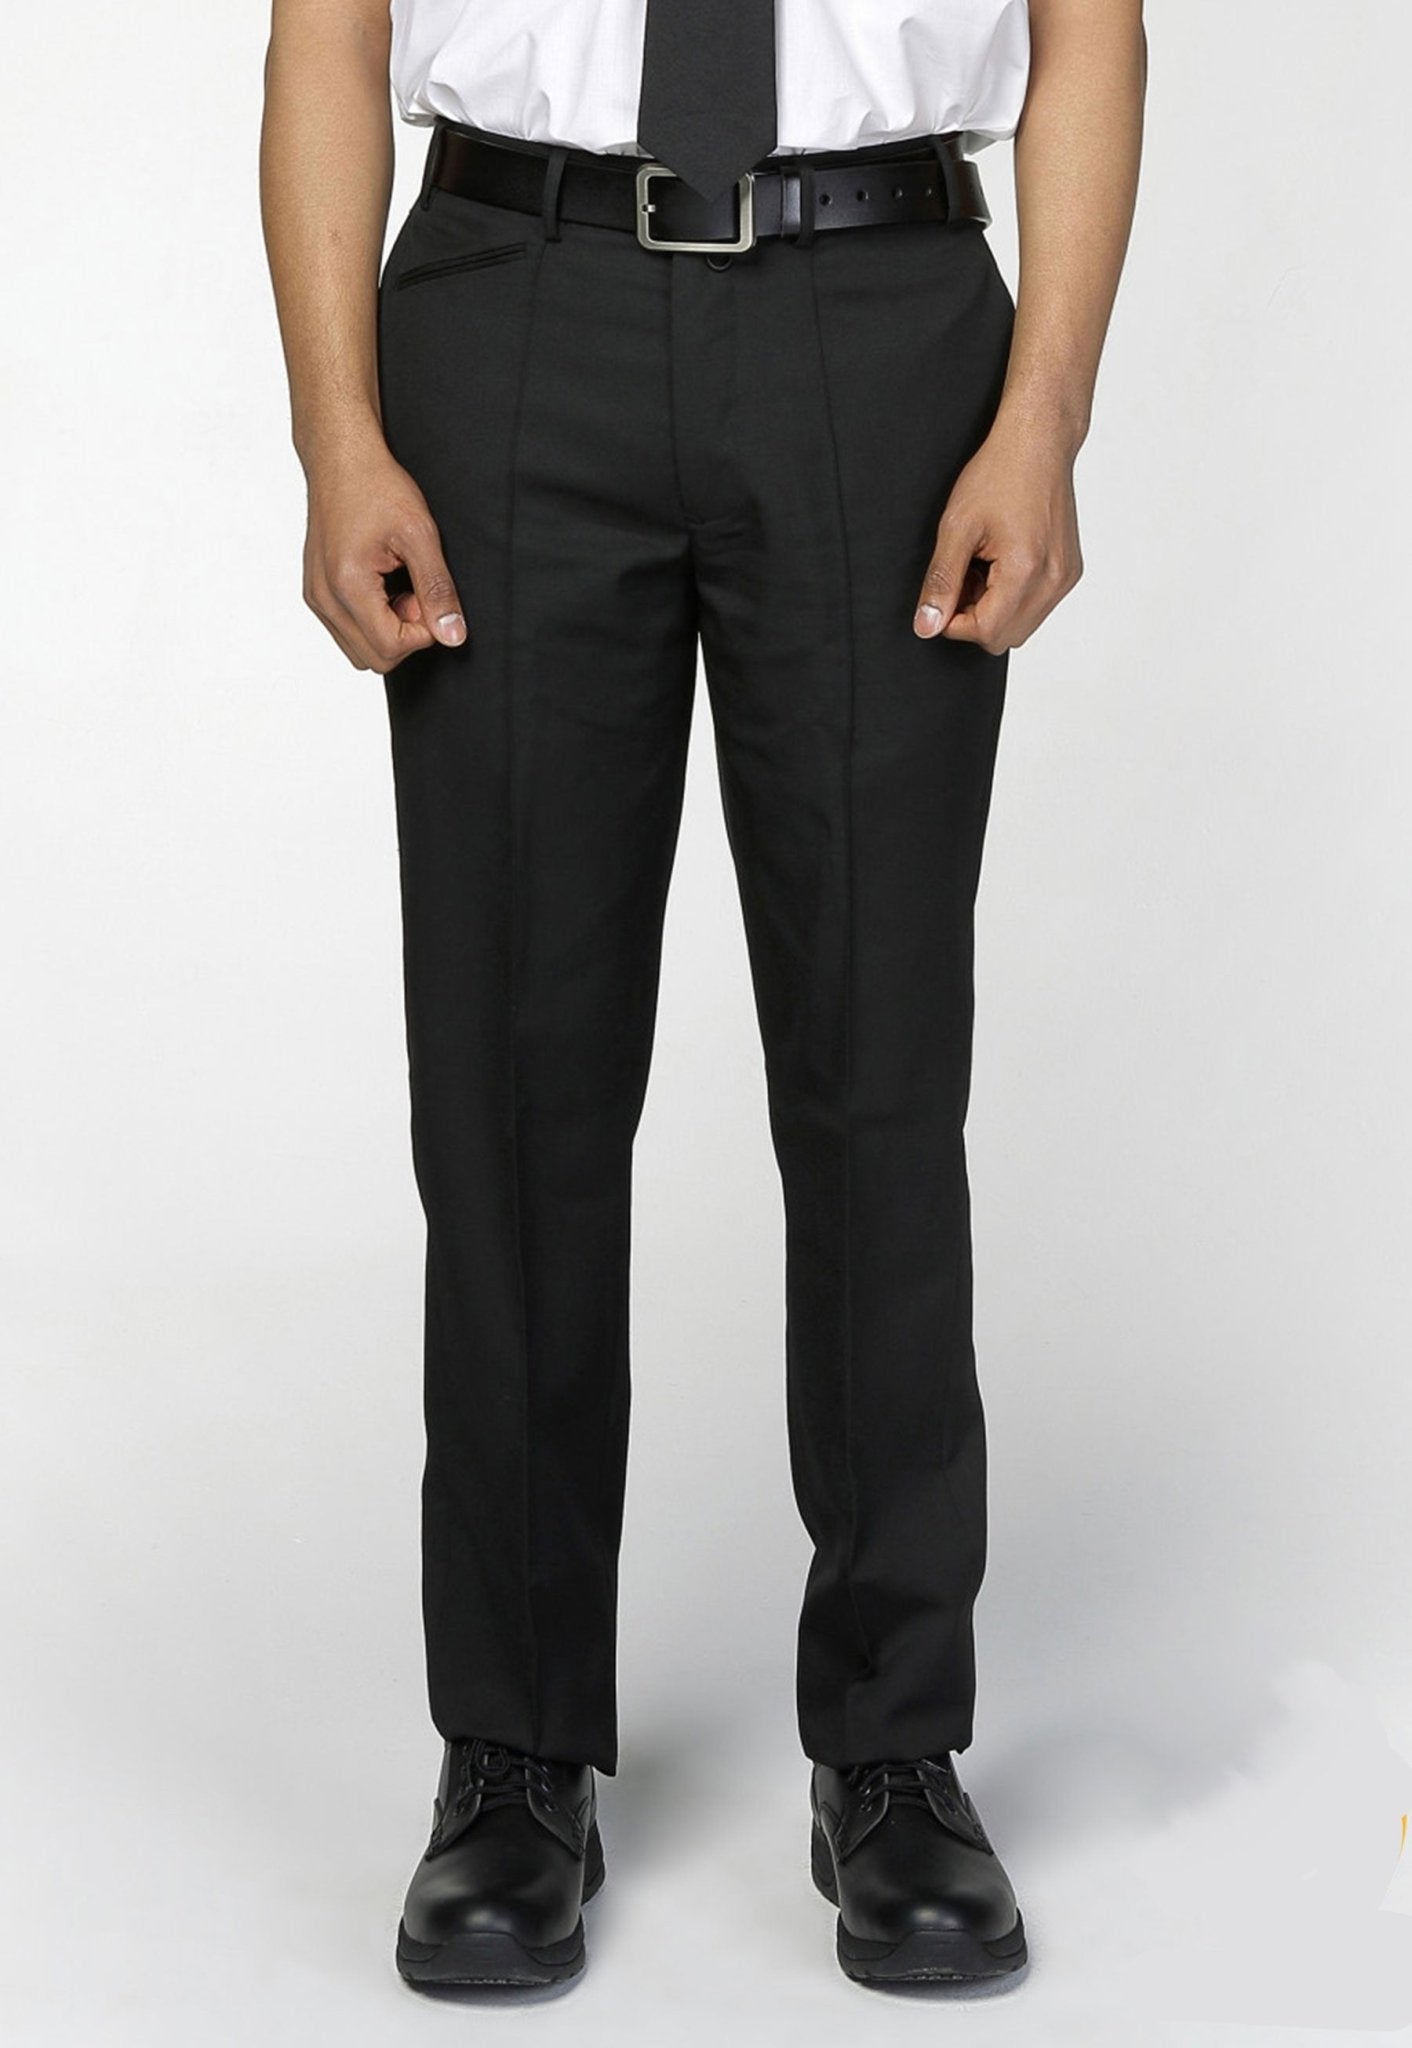 Female Suiting Trouser  PolywoolLycra